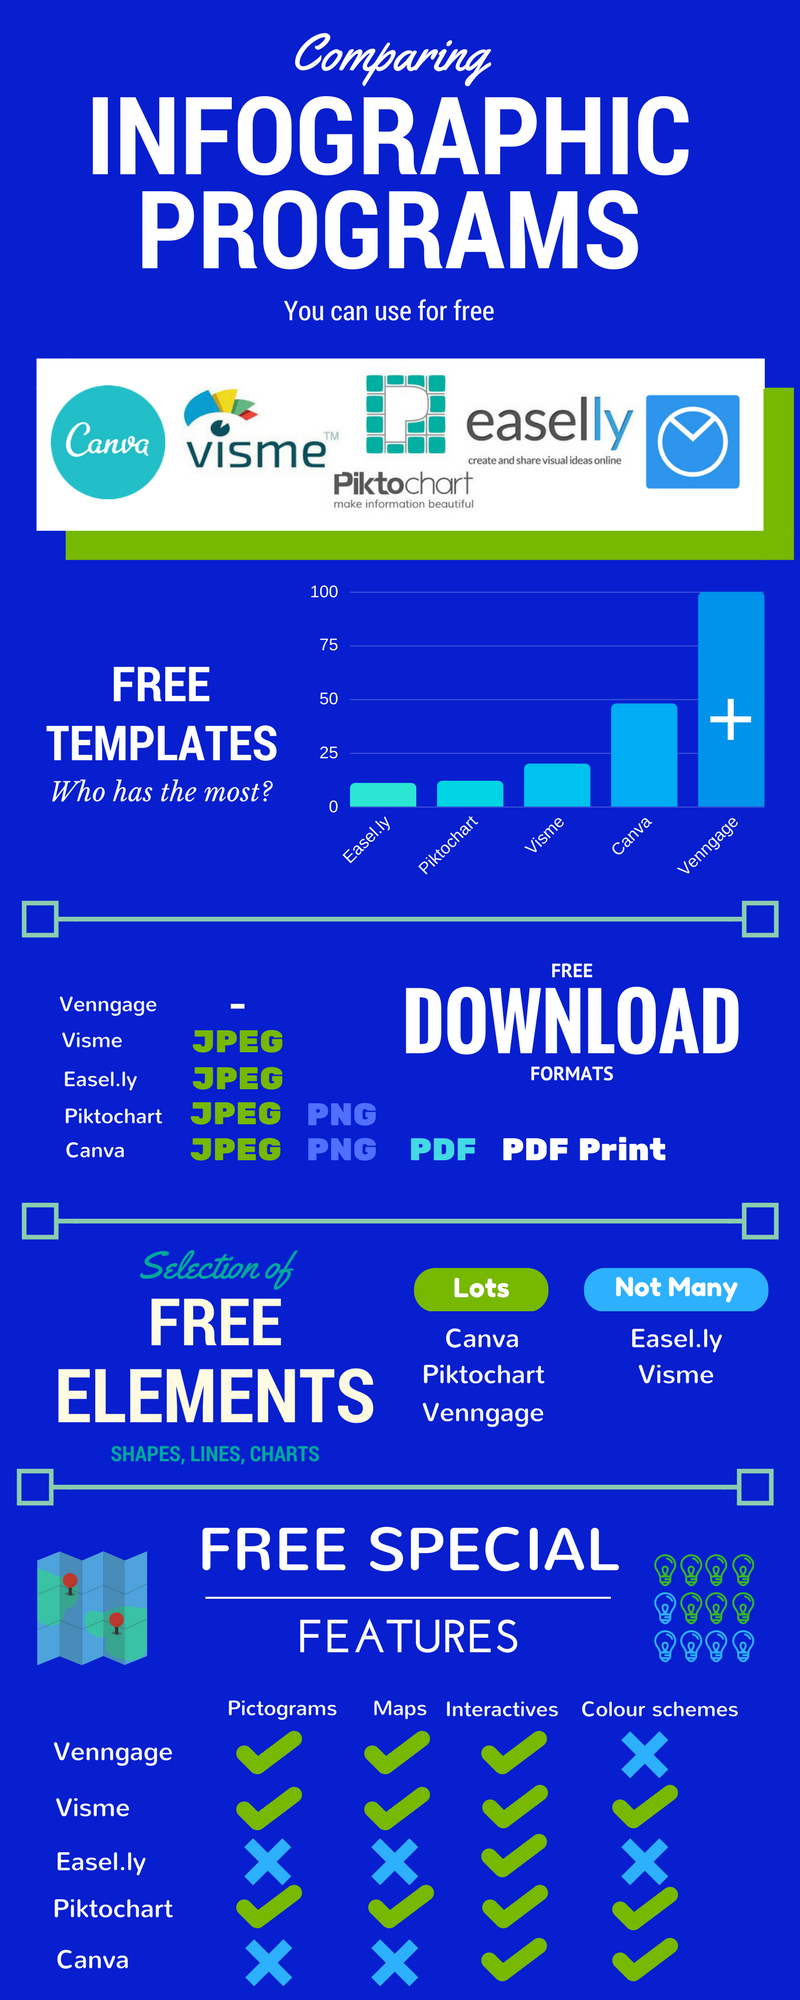 Infographic comparing different infographic creation programs